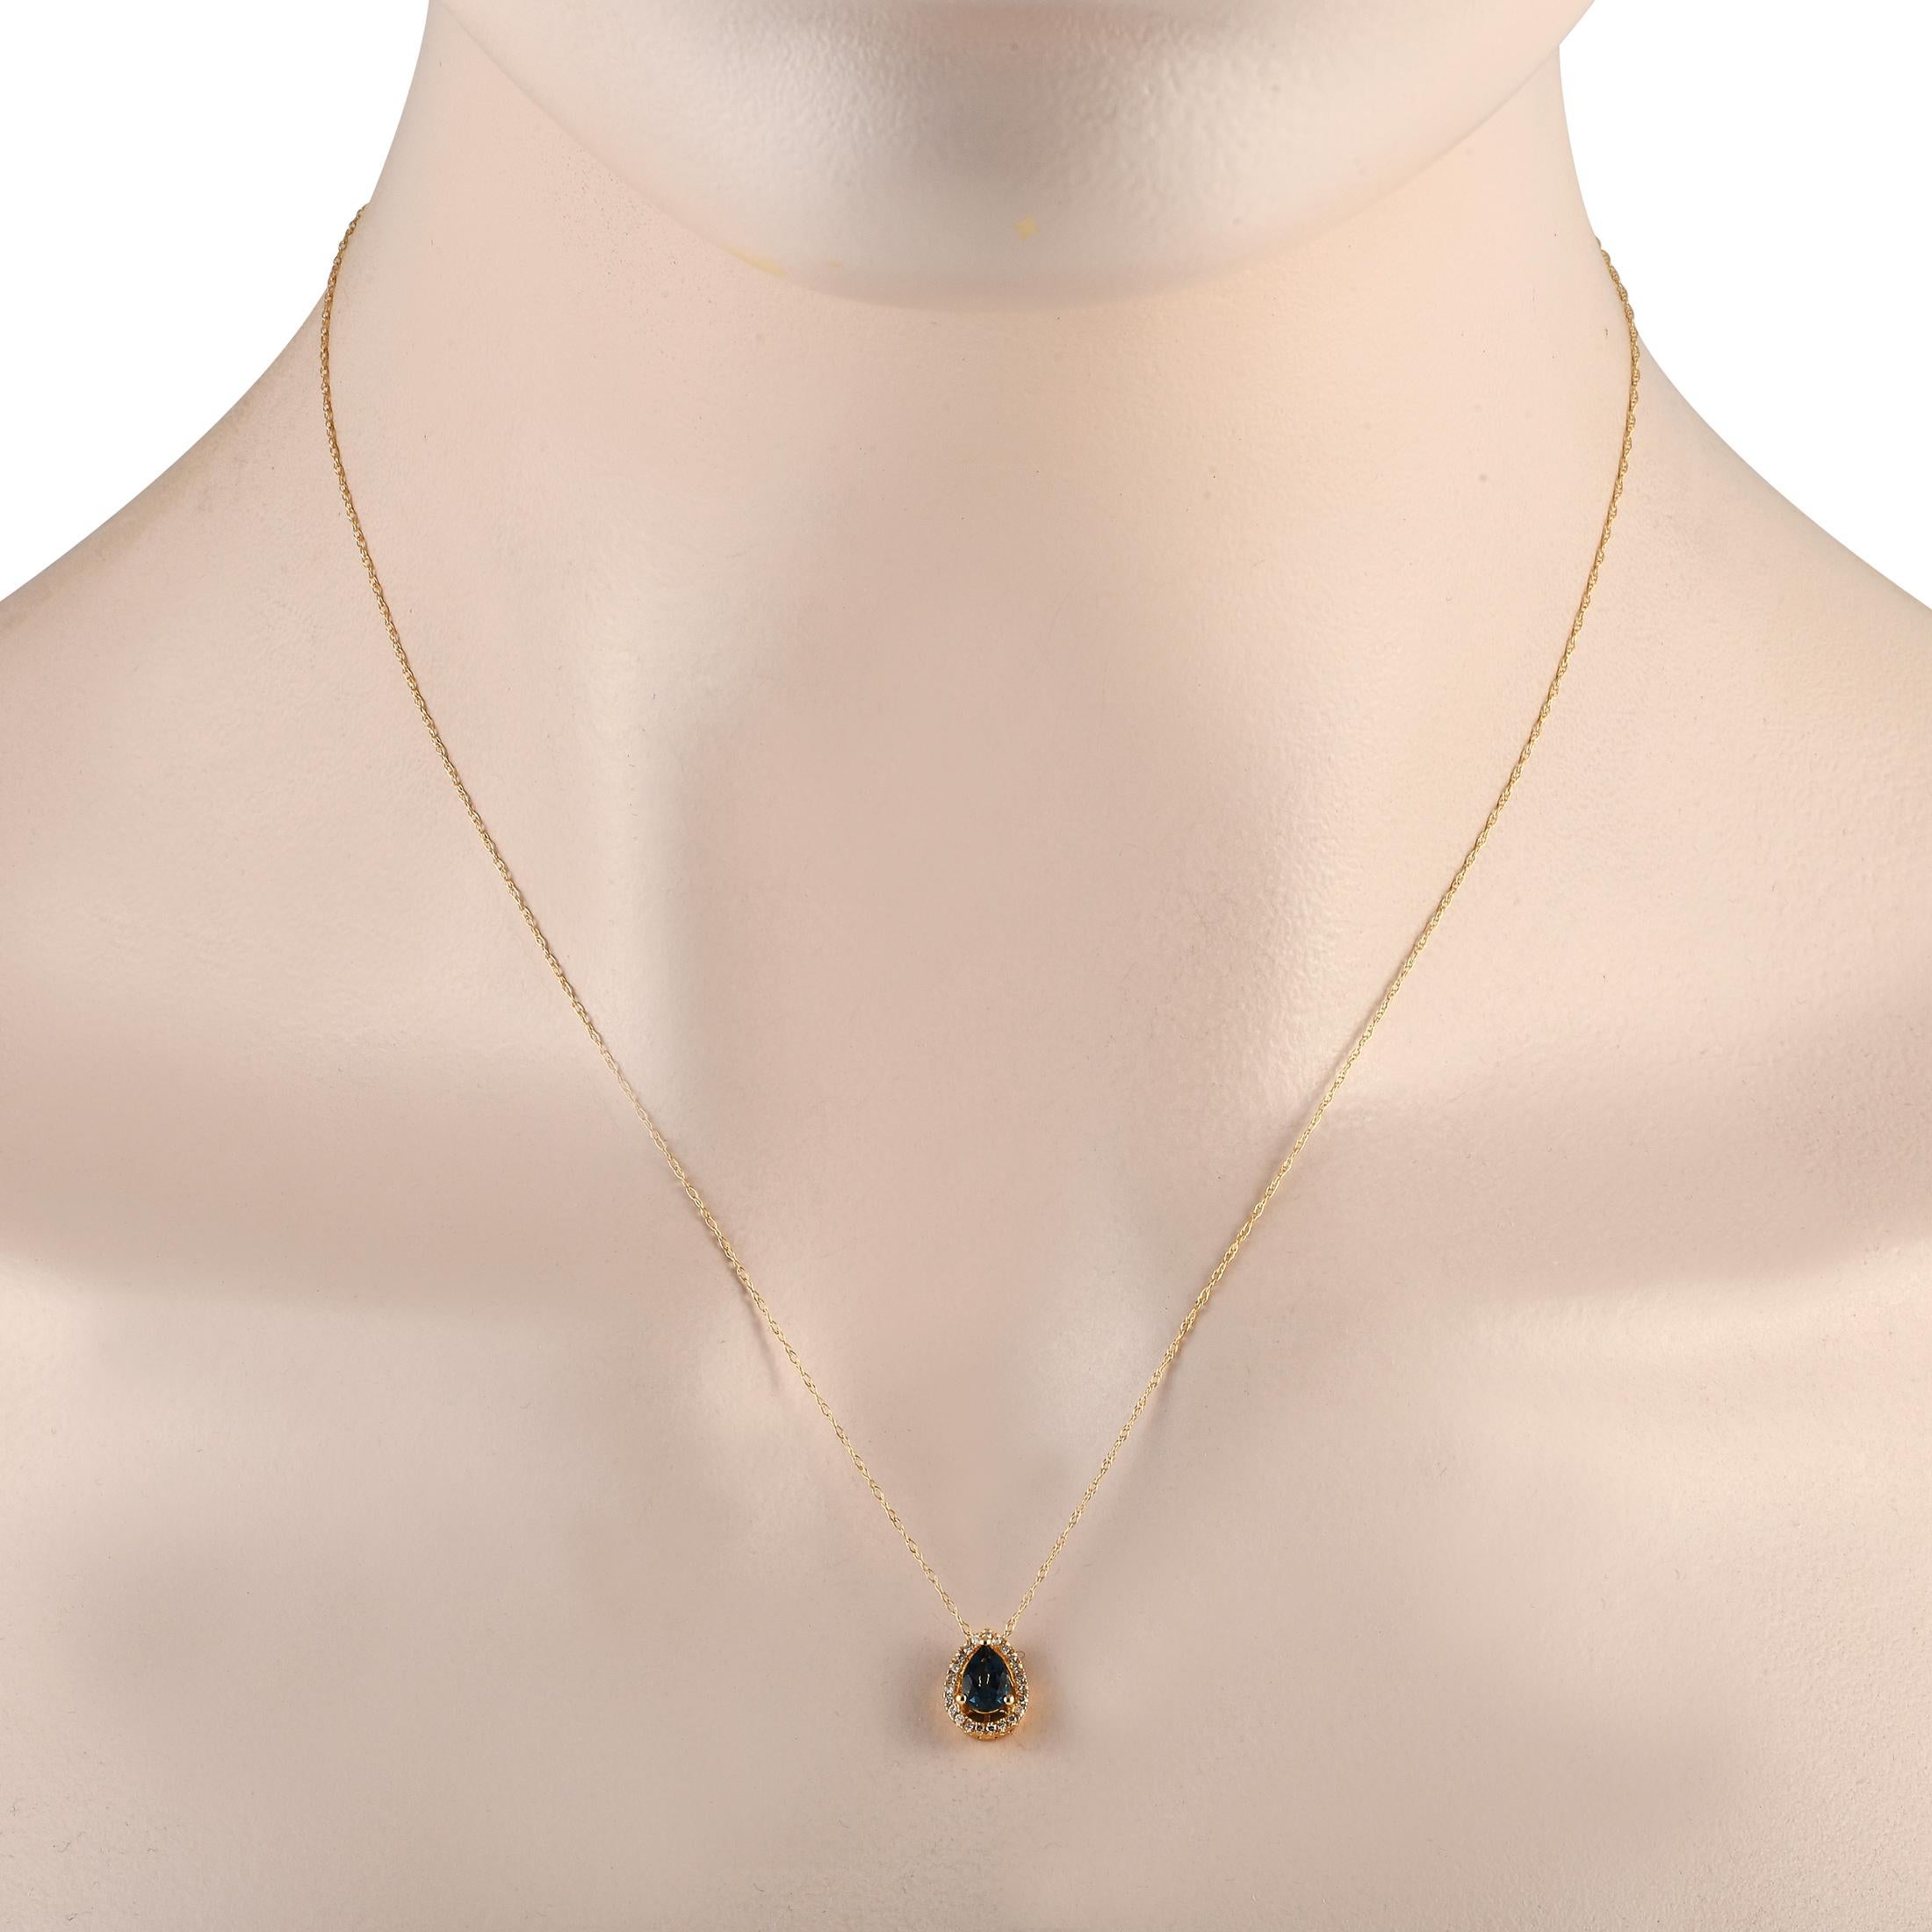 Want to add a touch of drama to your dressy looks? Wear this diamond and blue topaz necklace. It comes with a dainty 14K yellow gold cable chain with a spring ring clasp. The pear-shaped pendant has its outline traced with petite round diamonds. At